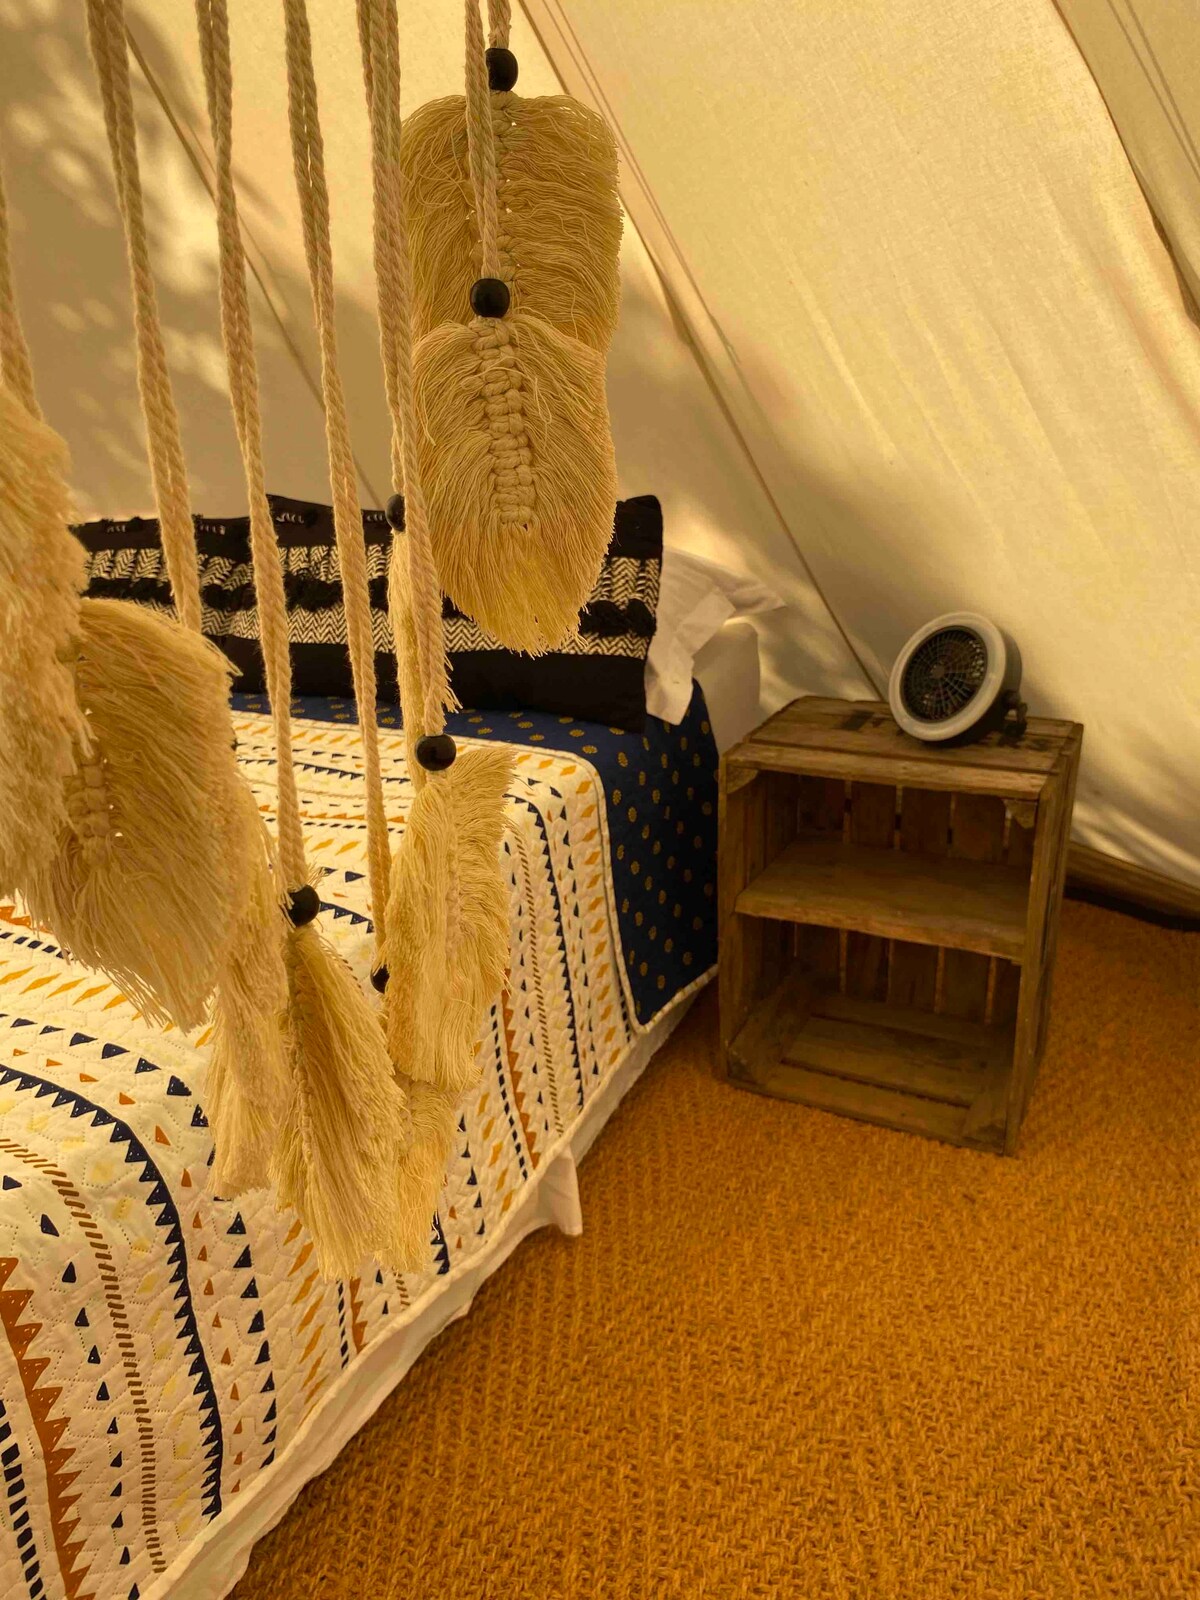 Walnut Tipi @Finders Keepers France. Adults only